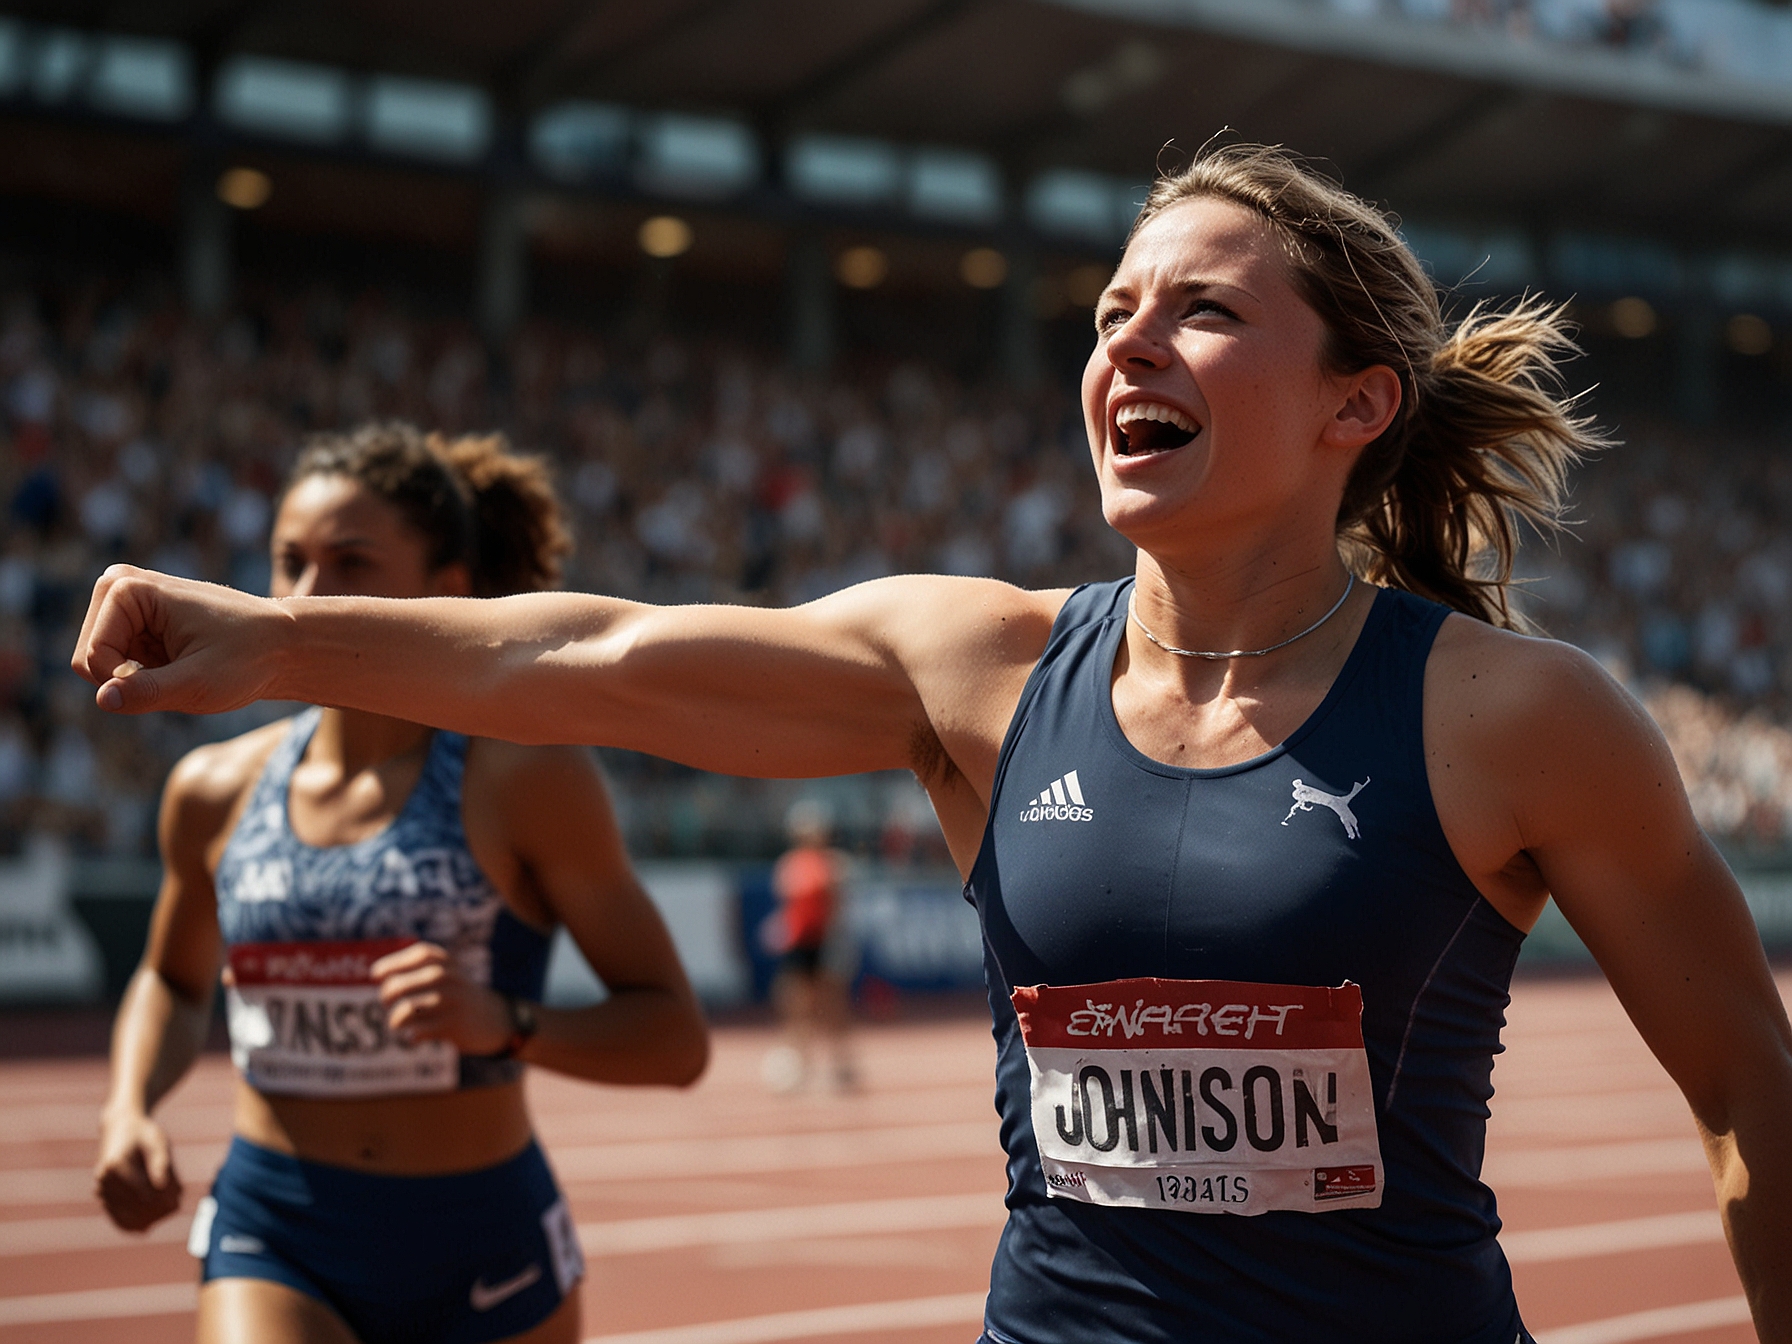 Sarah Johnson celebrates after winning the 100-meter race qualifiers in Budapest, securing her spot for the Paris Games. Her victory is marked by sheer determination and athletic excellence.